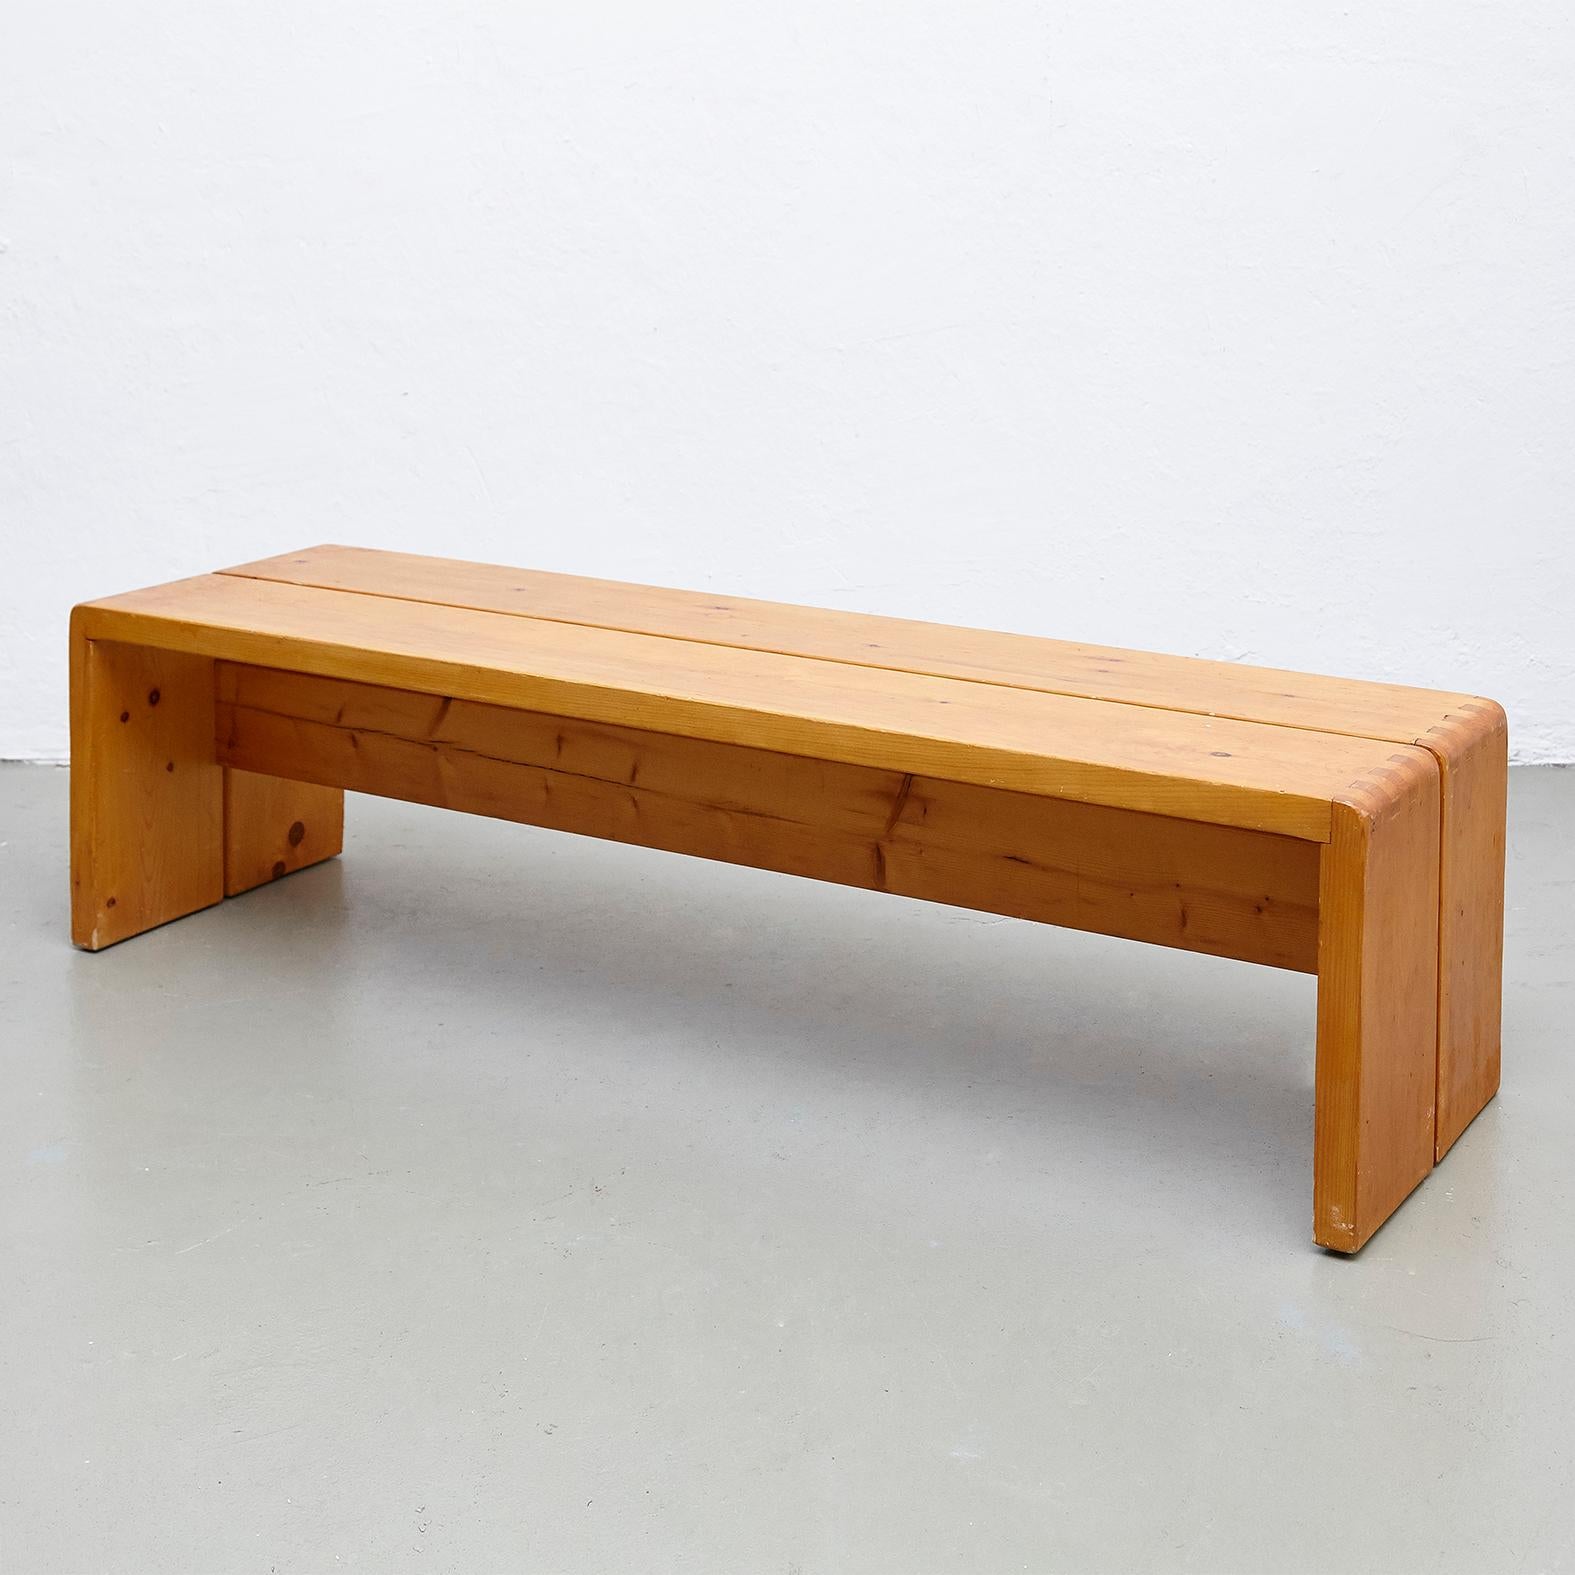 Bench designed by Charlotte Perriand for Les Arcs ski resort circa 1960, manufactured in France.
Pinewood.

In original condition, with wear consistent with age and use, preserving a beautiful patina.

Charlotte Perriand (1903-1999) She was